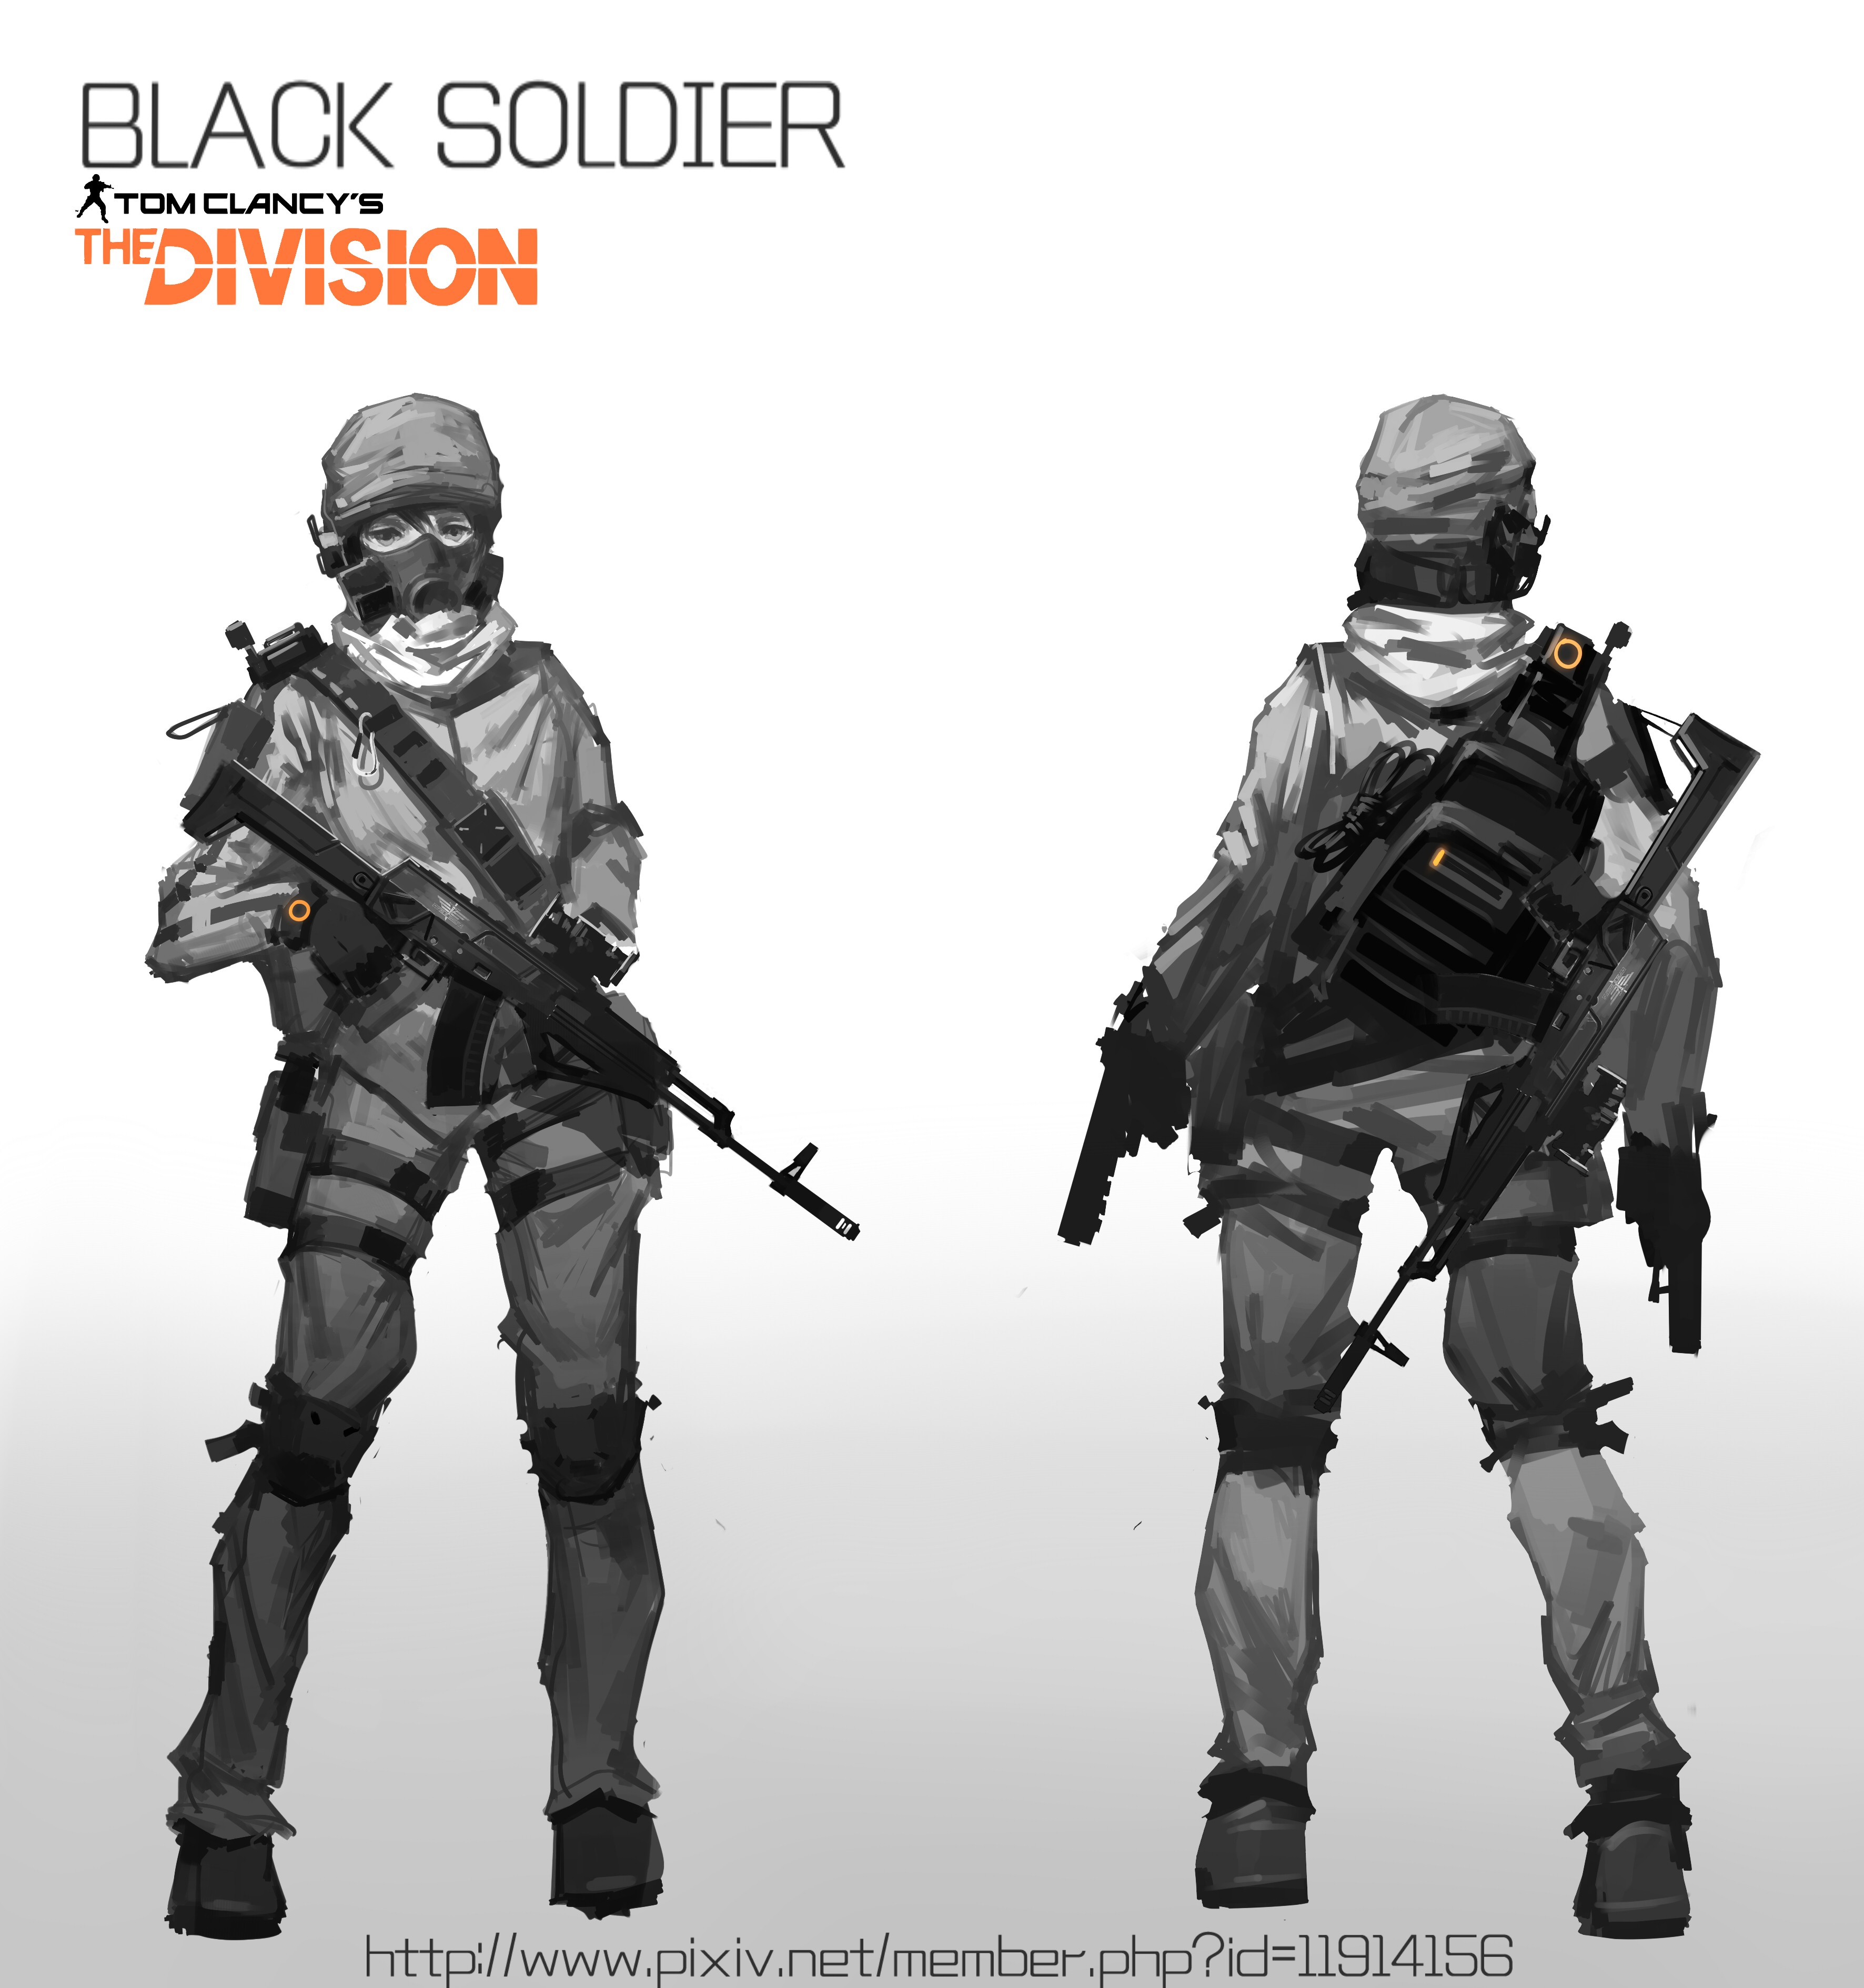 Anime 3543x3779 anime anime girls weapon gun Tom Clancy's The Division uniform video games Black Soldier Pixiv white background girls with guns machine gun fan art video game art PC gaming video game girls